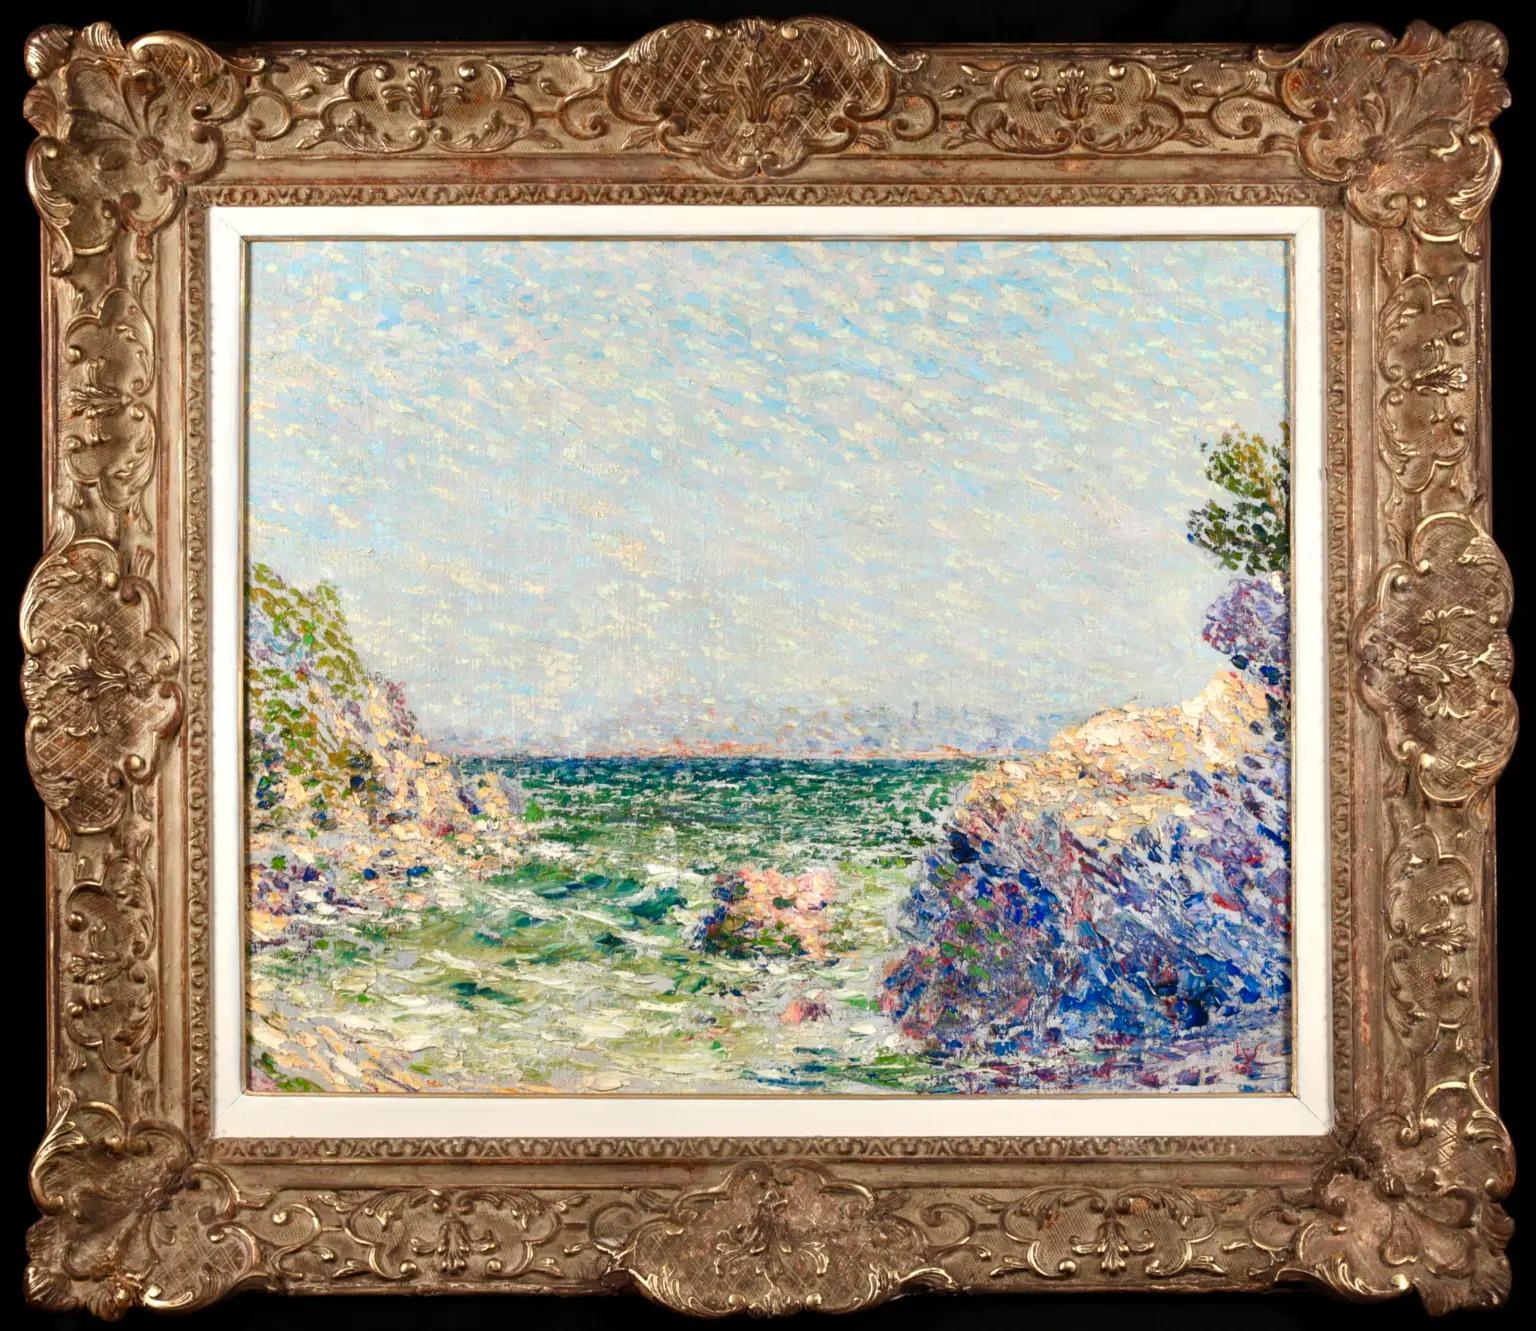 Signed and dated pointillist landscape oil on canvas by Belgian impressionist painter Willy Schlobach. The piece depicts a coastal view looking out over the dark green sea to where it meets the powder blue sky on the distant horizon, with rock